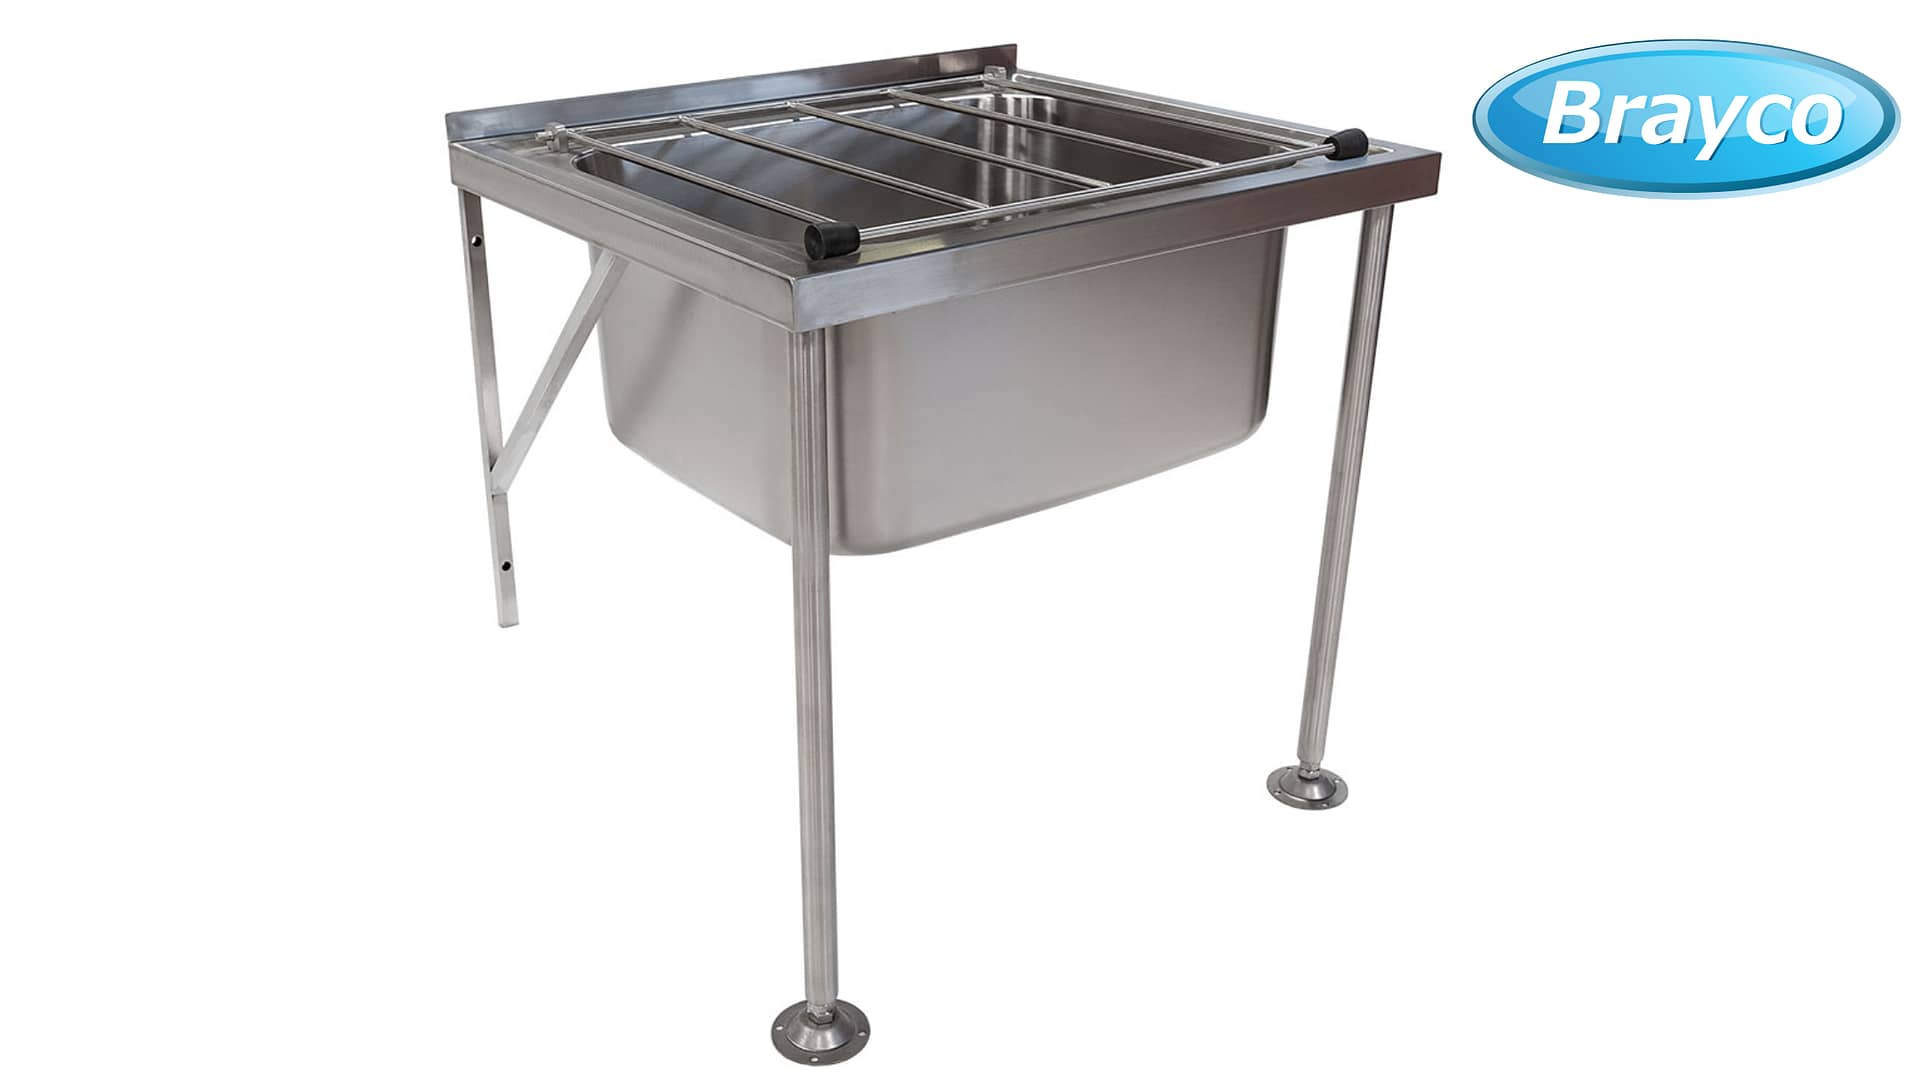 stainless steel cleaners sink